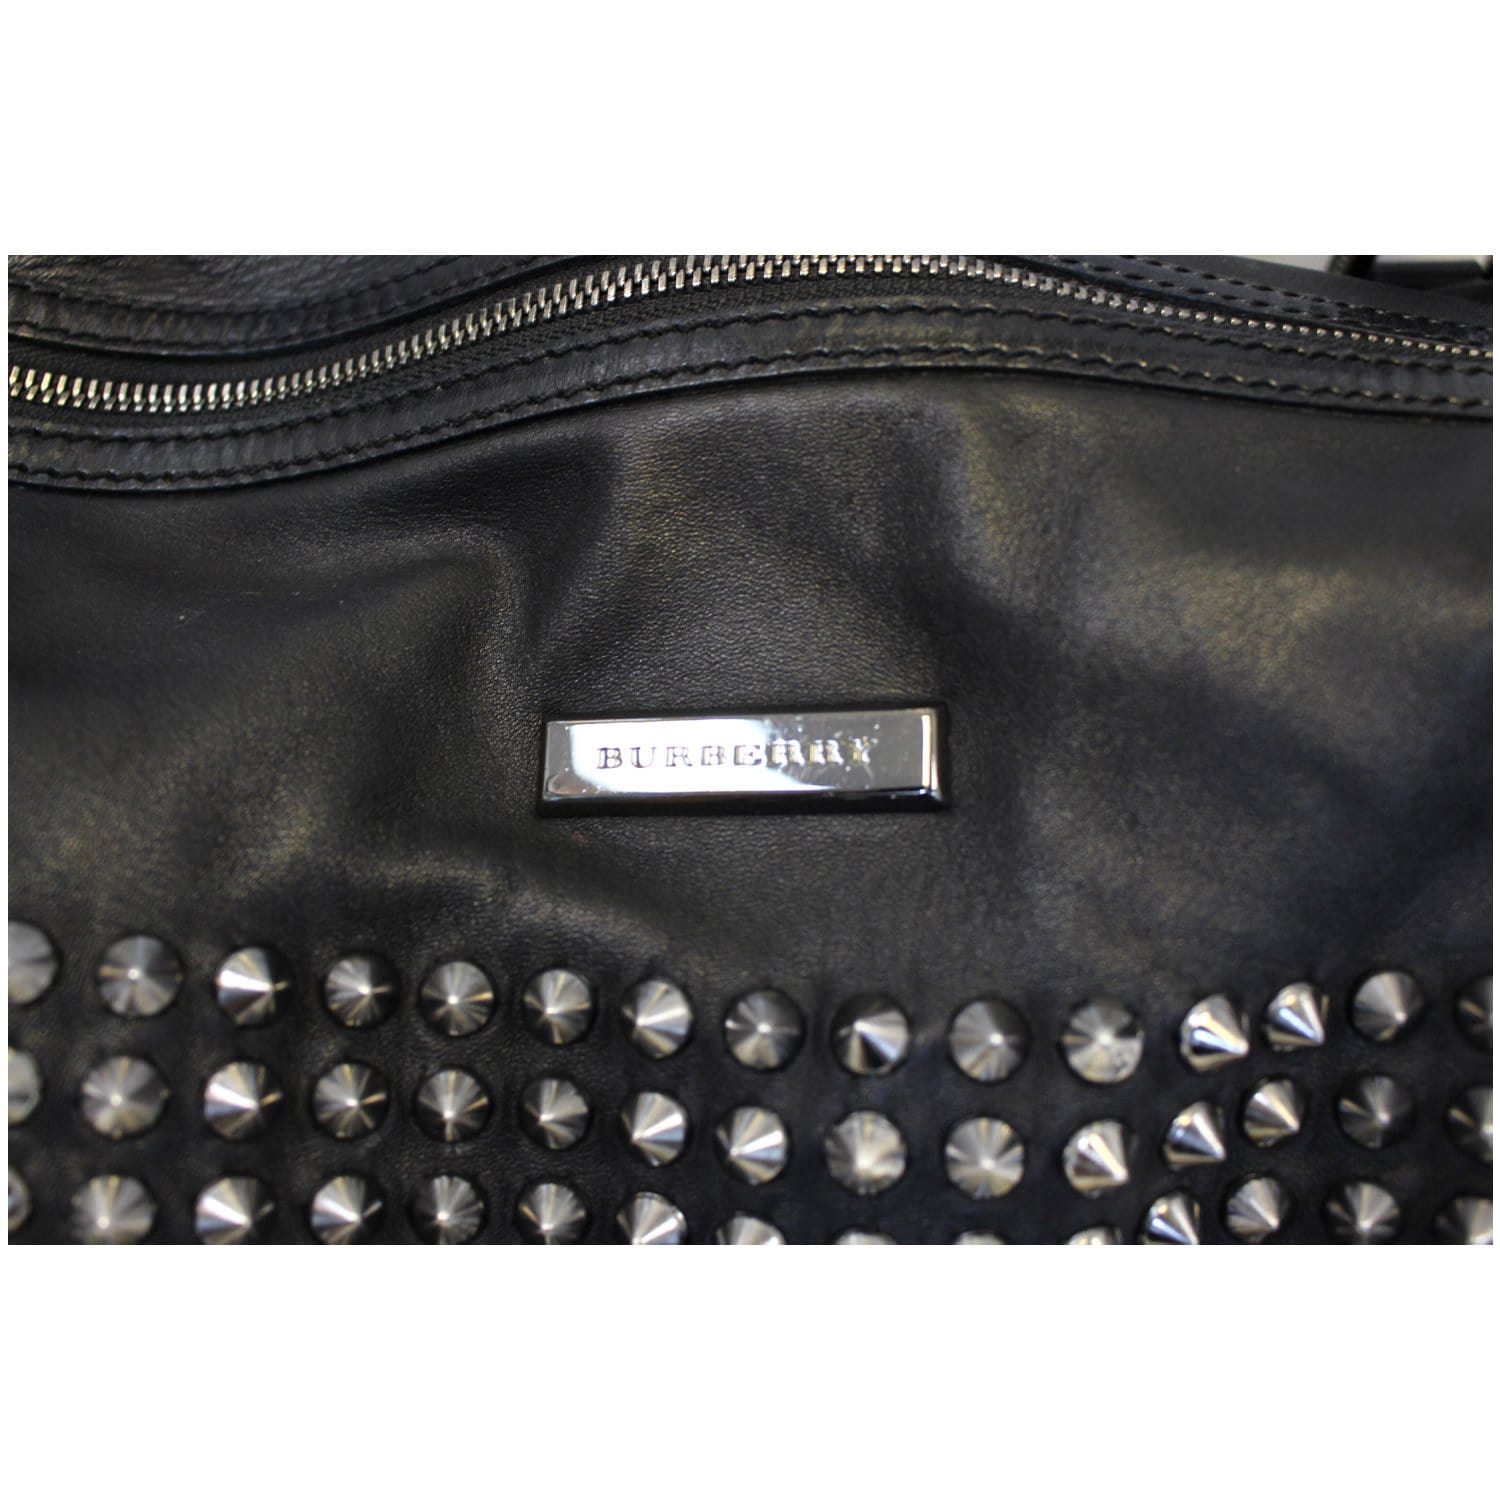 Burberry, Bags, Burberry Bridle Baby Studded Leather Shoulder Bag Black